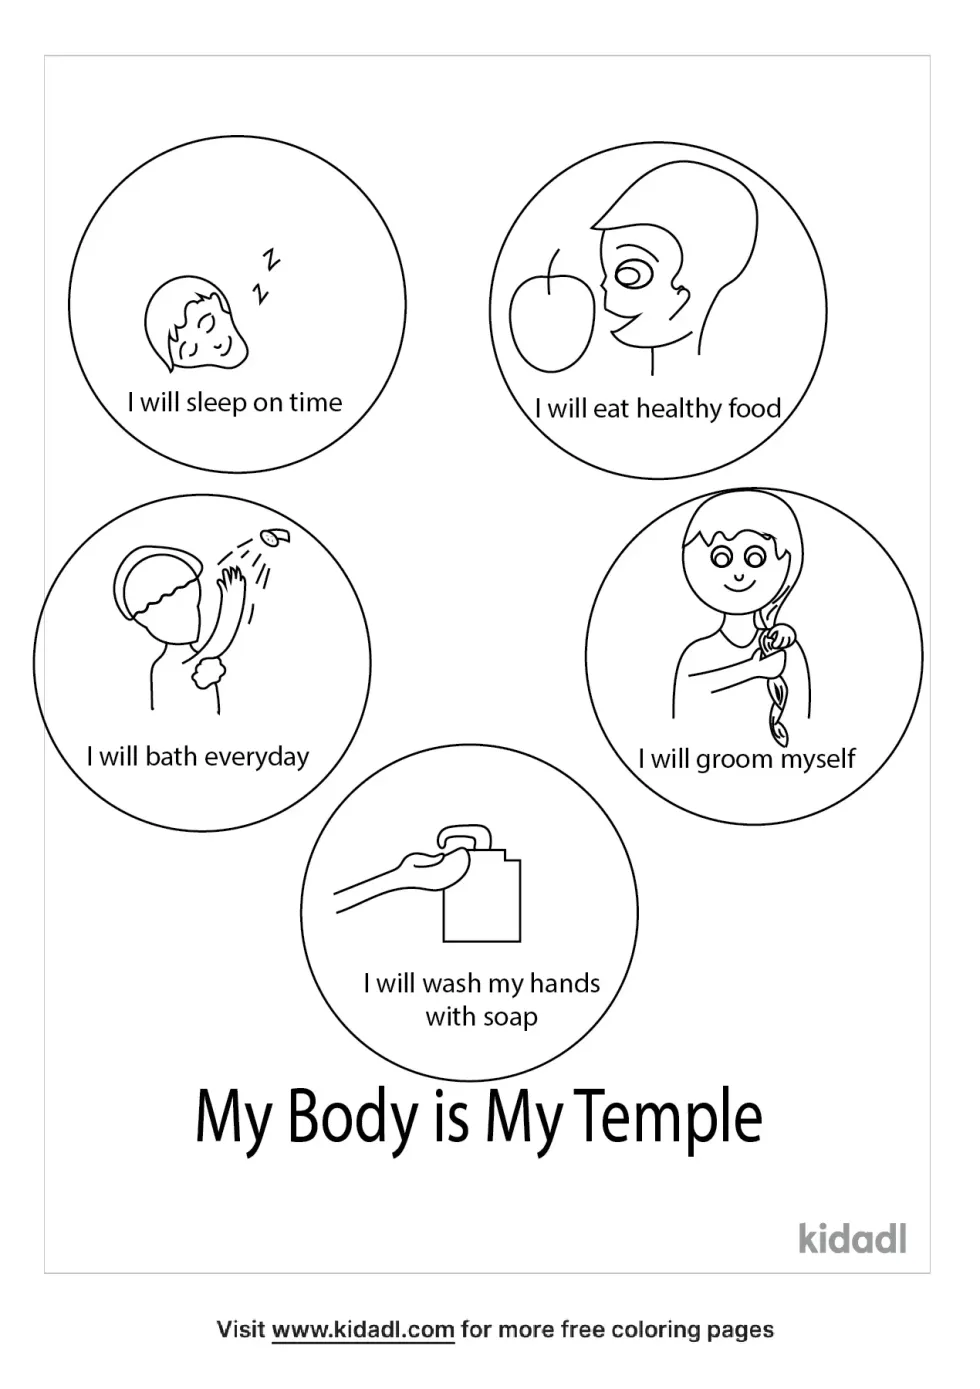 My Body Is A Temple Coloring Page